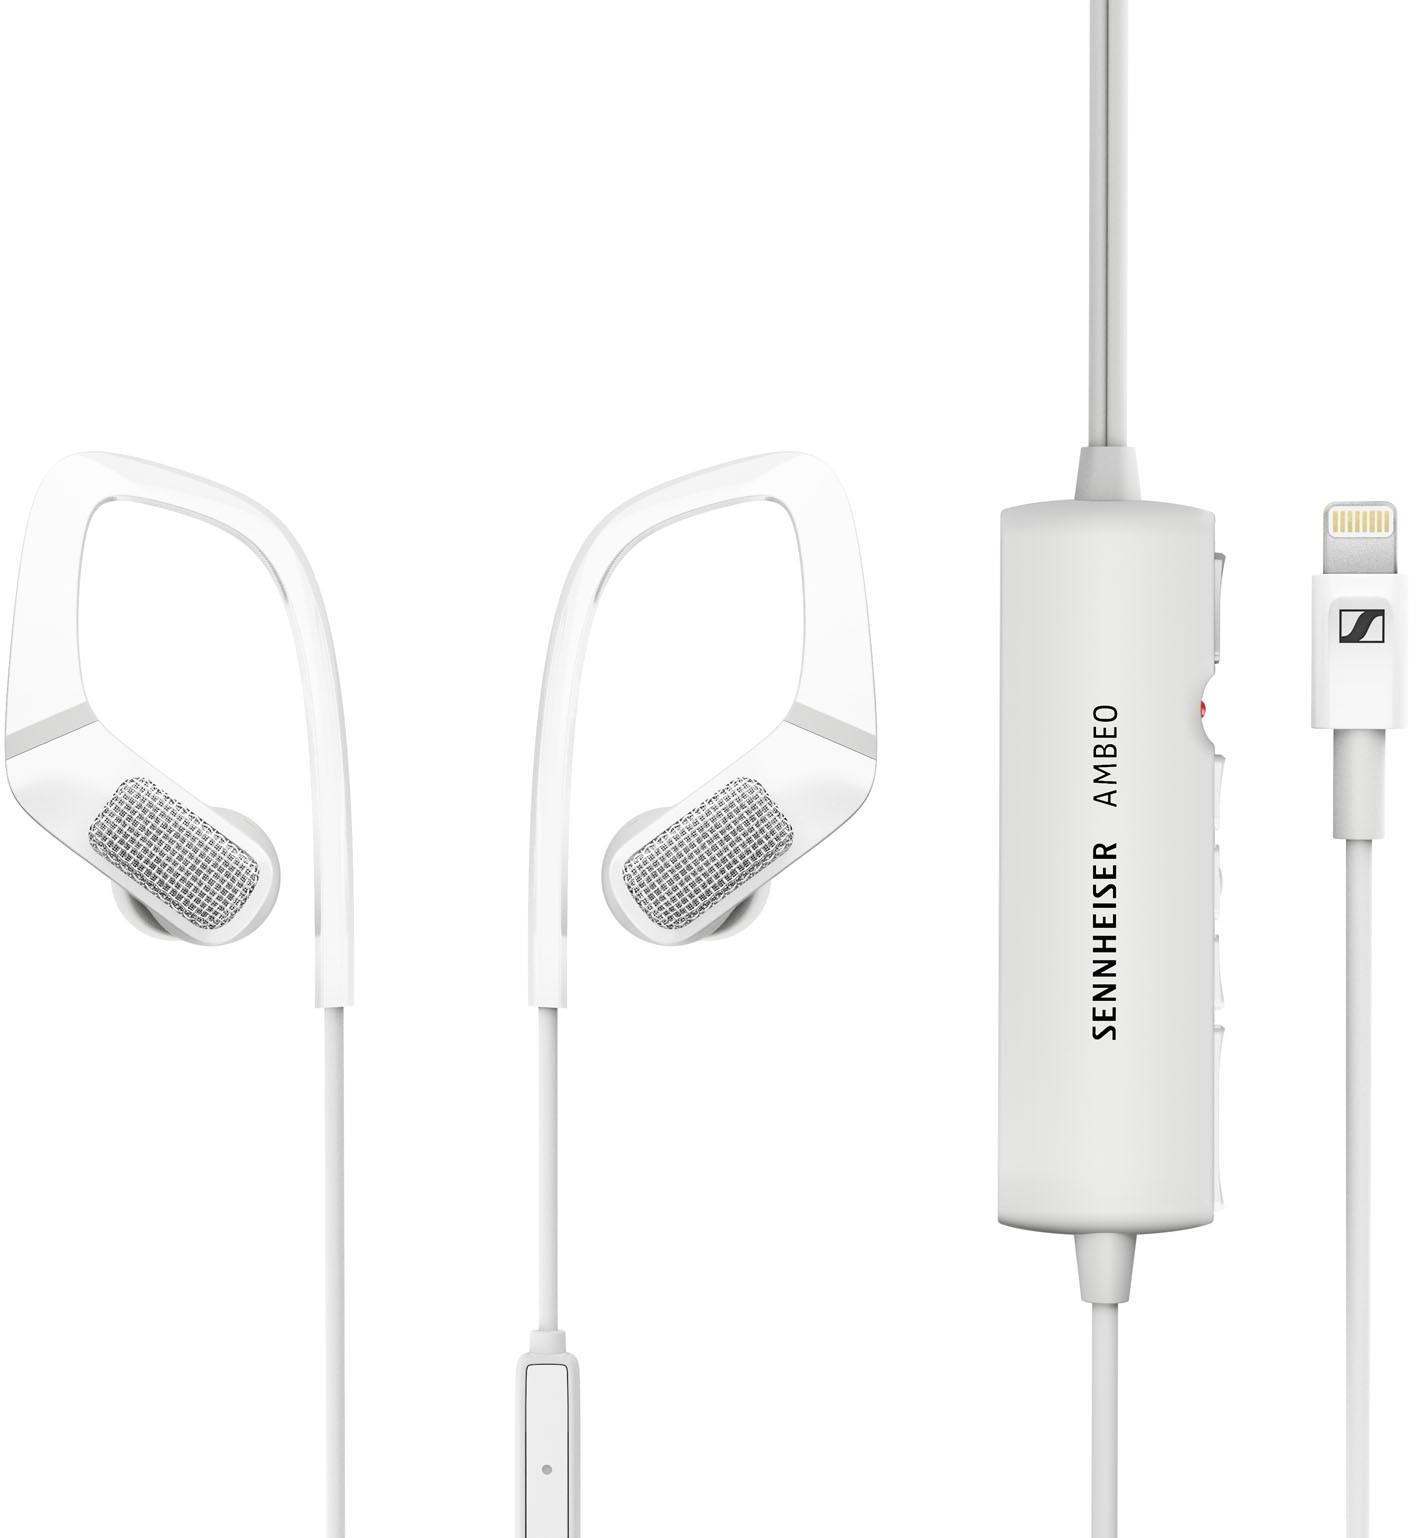 Ecouteur intra-auriculaire Sennheiser Ambeo Smart Headset